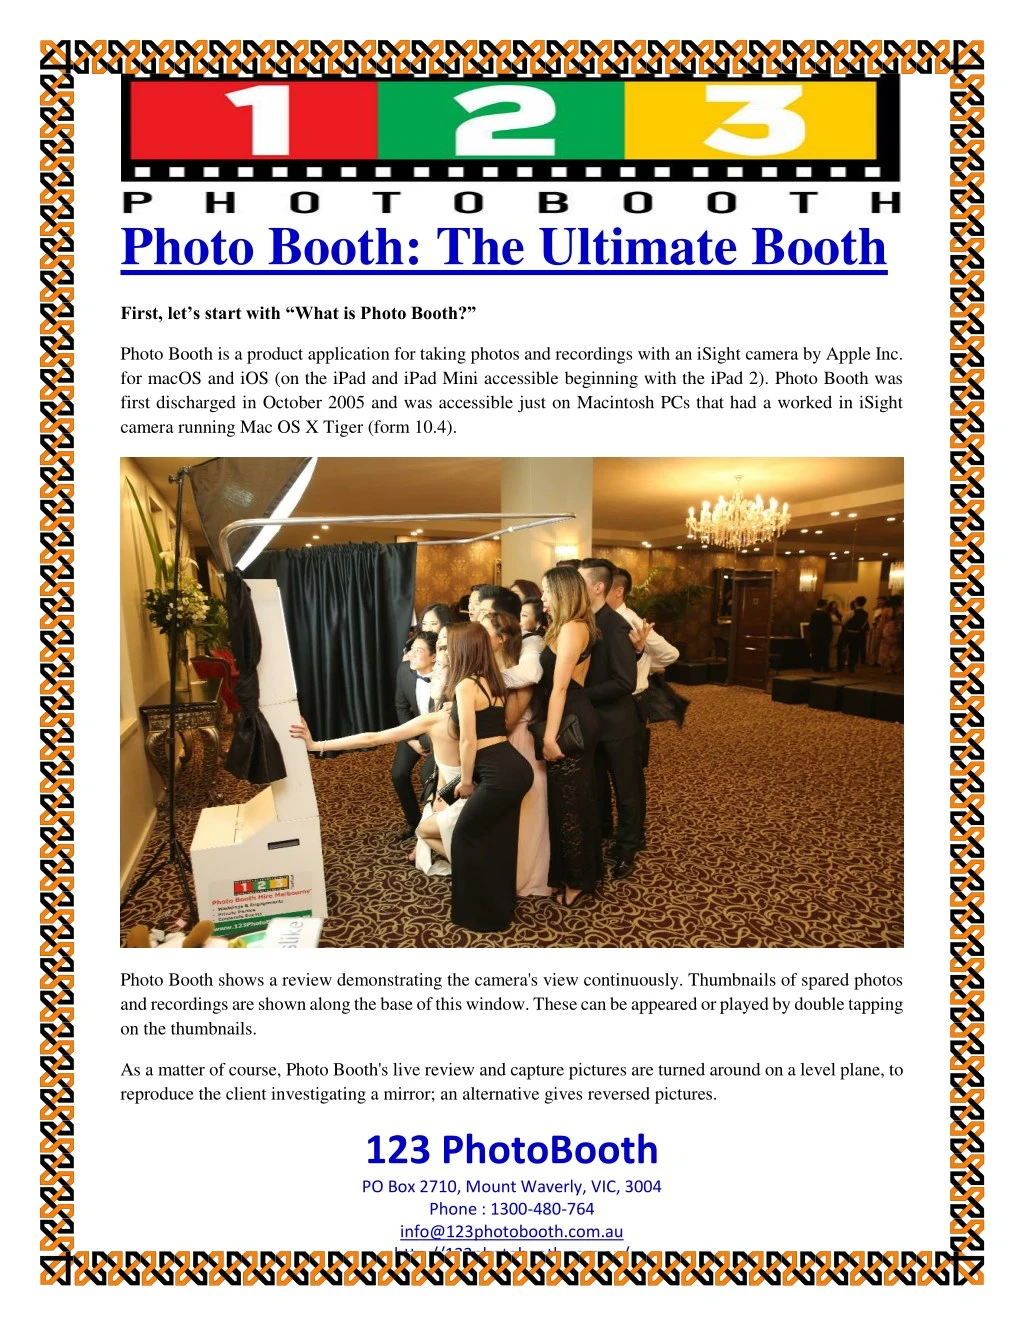 photo booth the ultimate booth